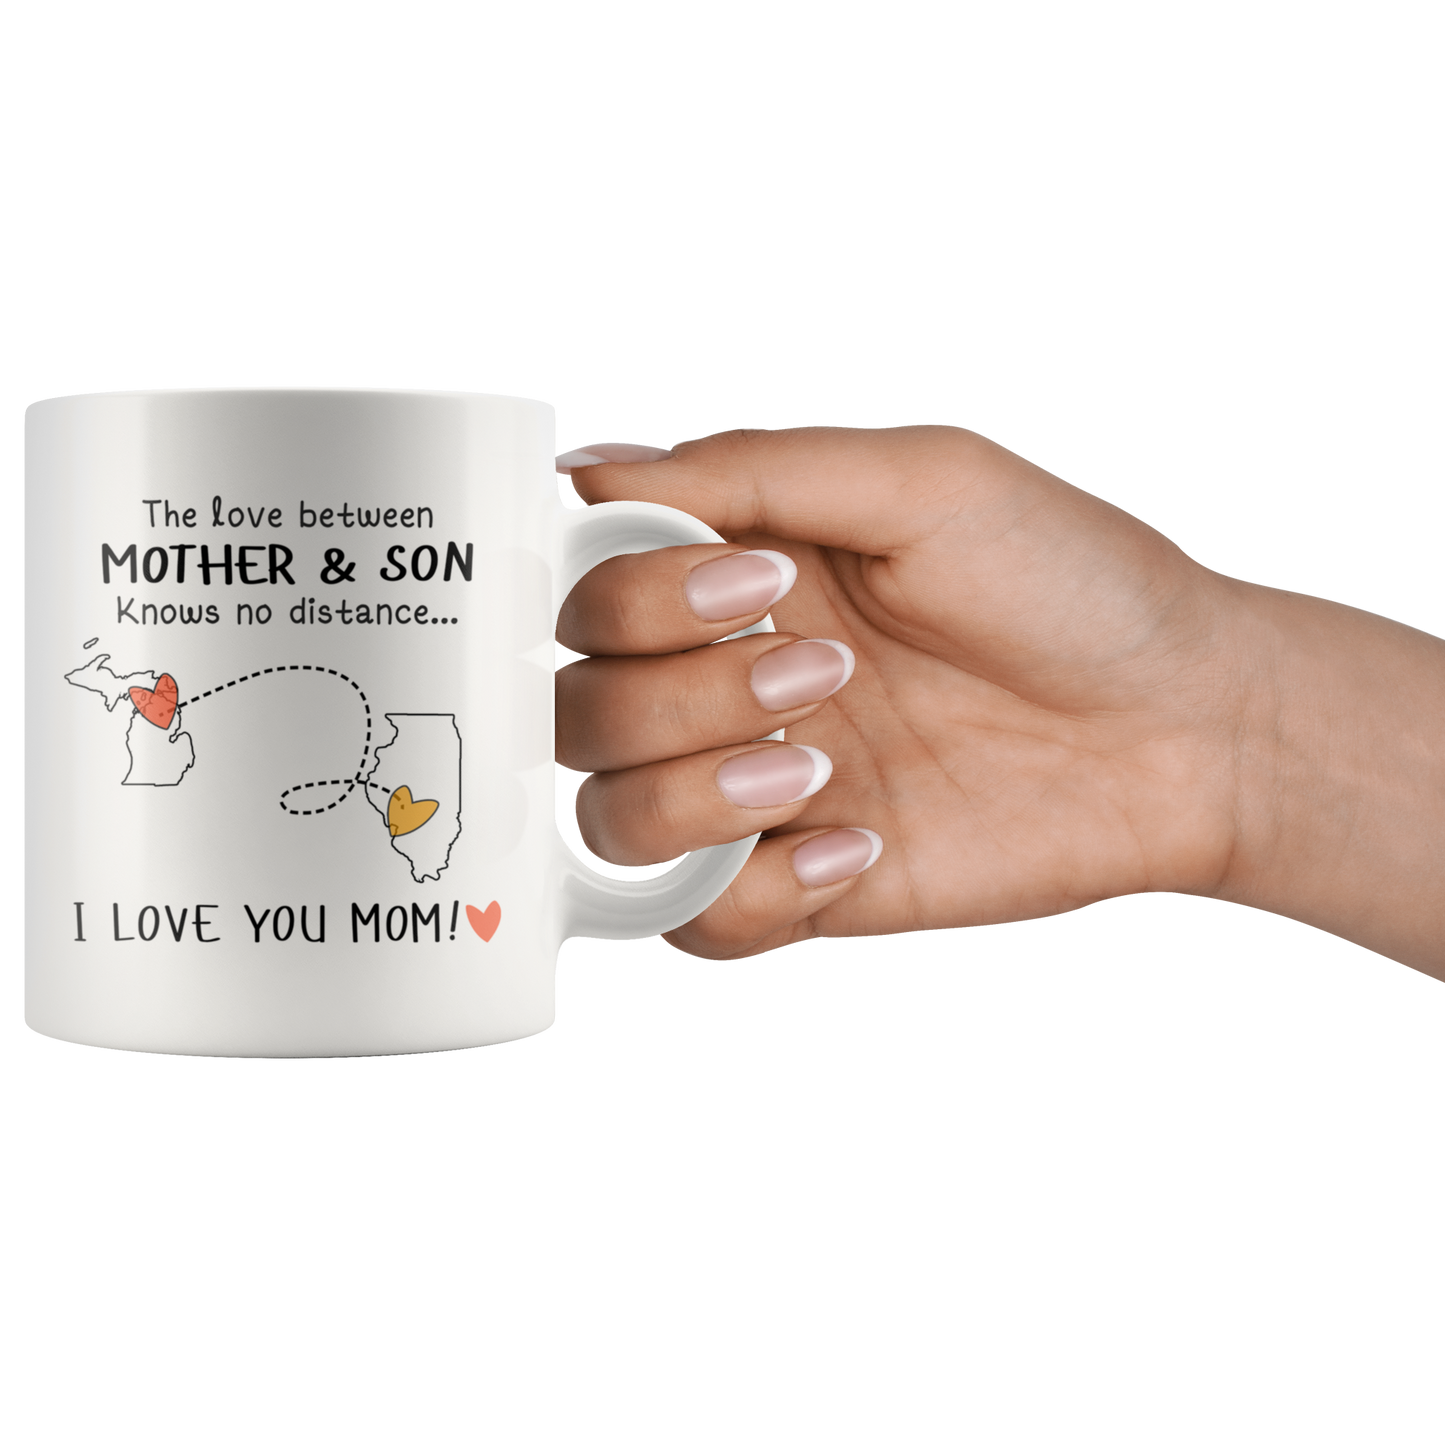 HNV-CUS-GRAND-sp-27697 - [ Michigan | Illinois ] (mug_11oz_white) Mothers Day Gifts Personalized Mother Day Gifts Coffee Mug F